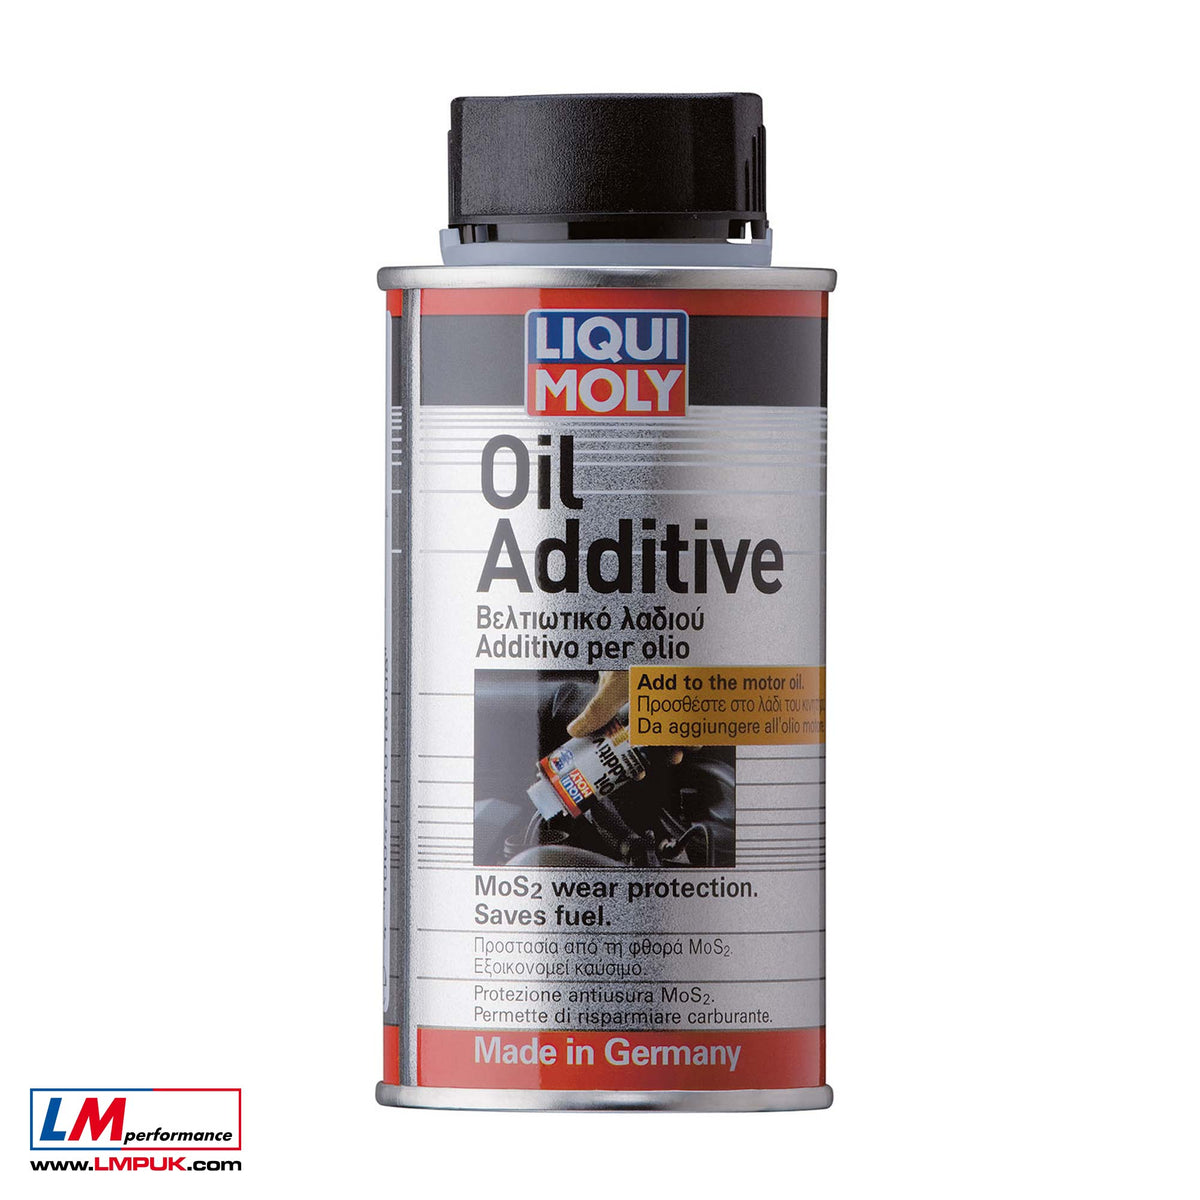 Oil Additive by LIQUI MOLY – LM Performance